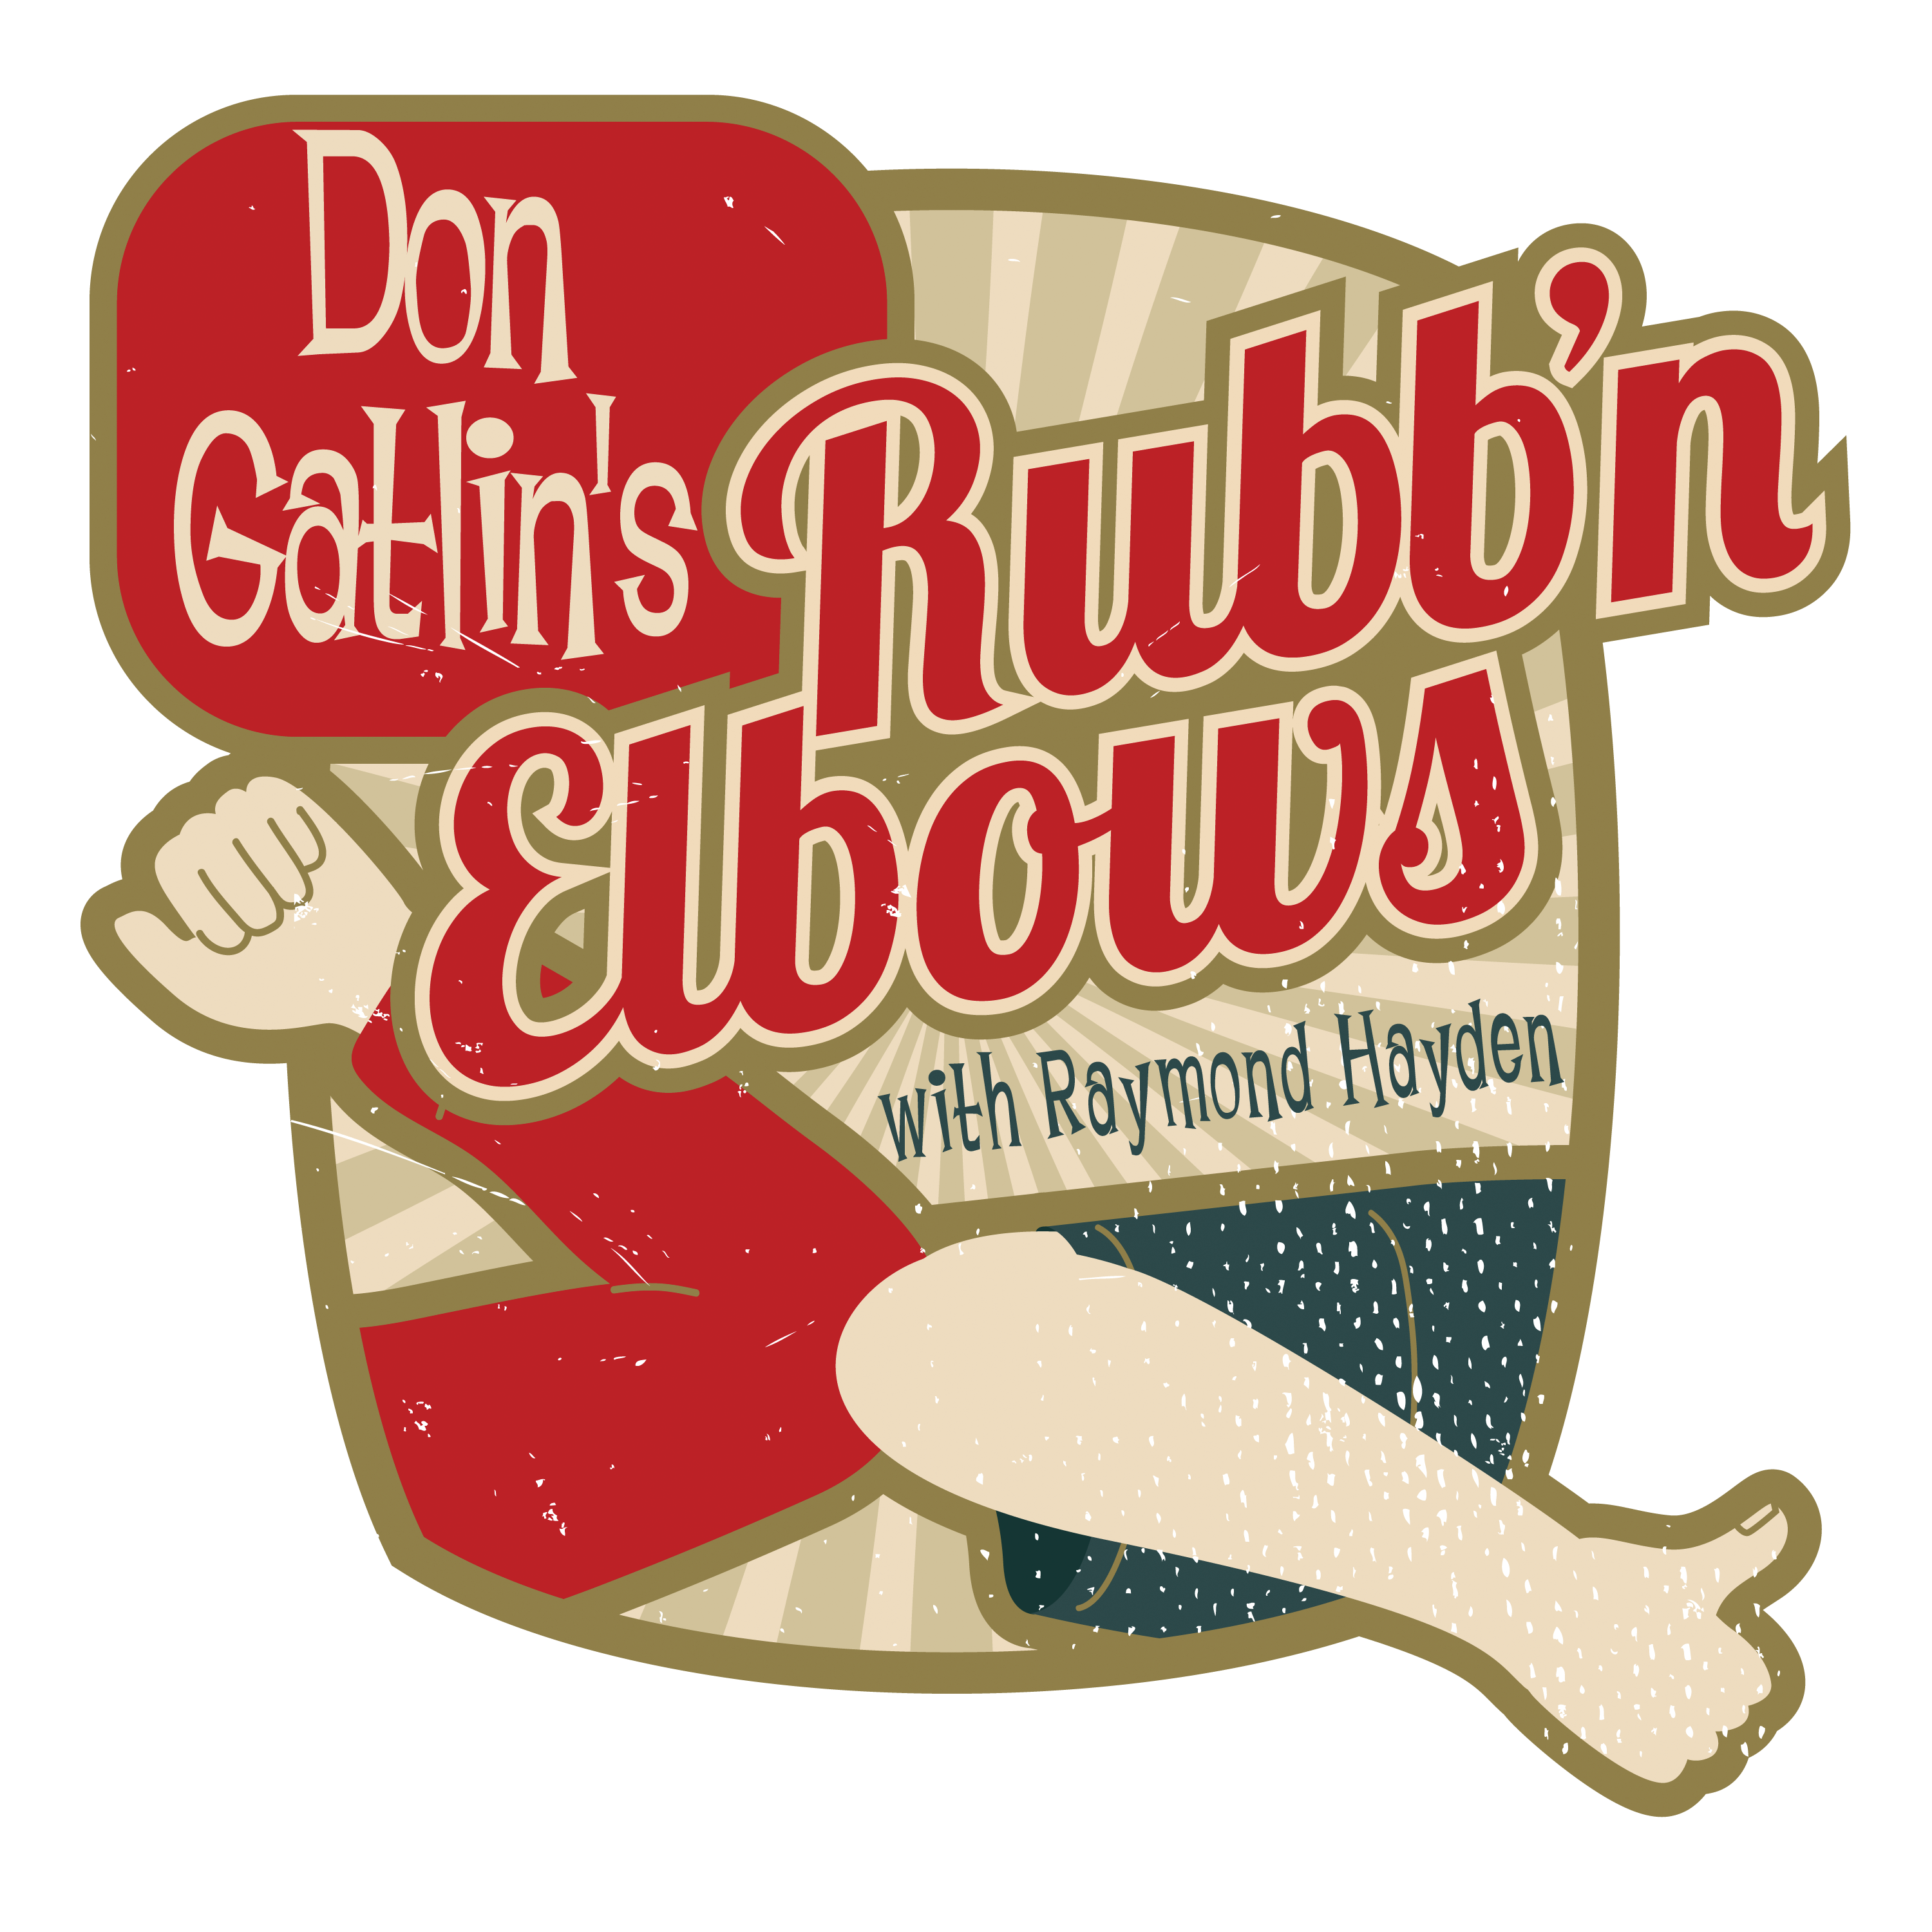 Rubb'n Elbows podcast with Don Gatlin (trailer)